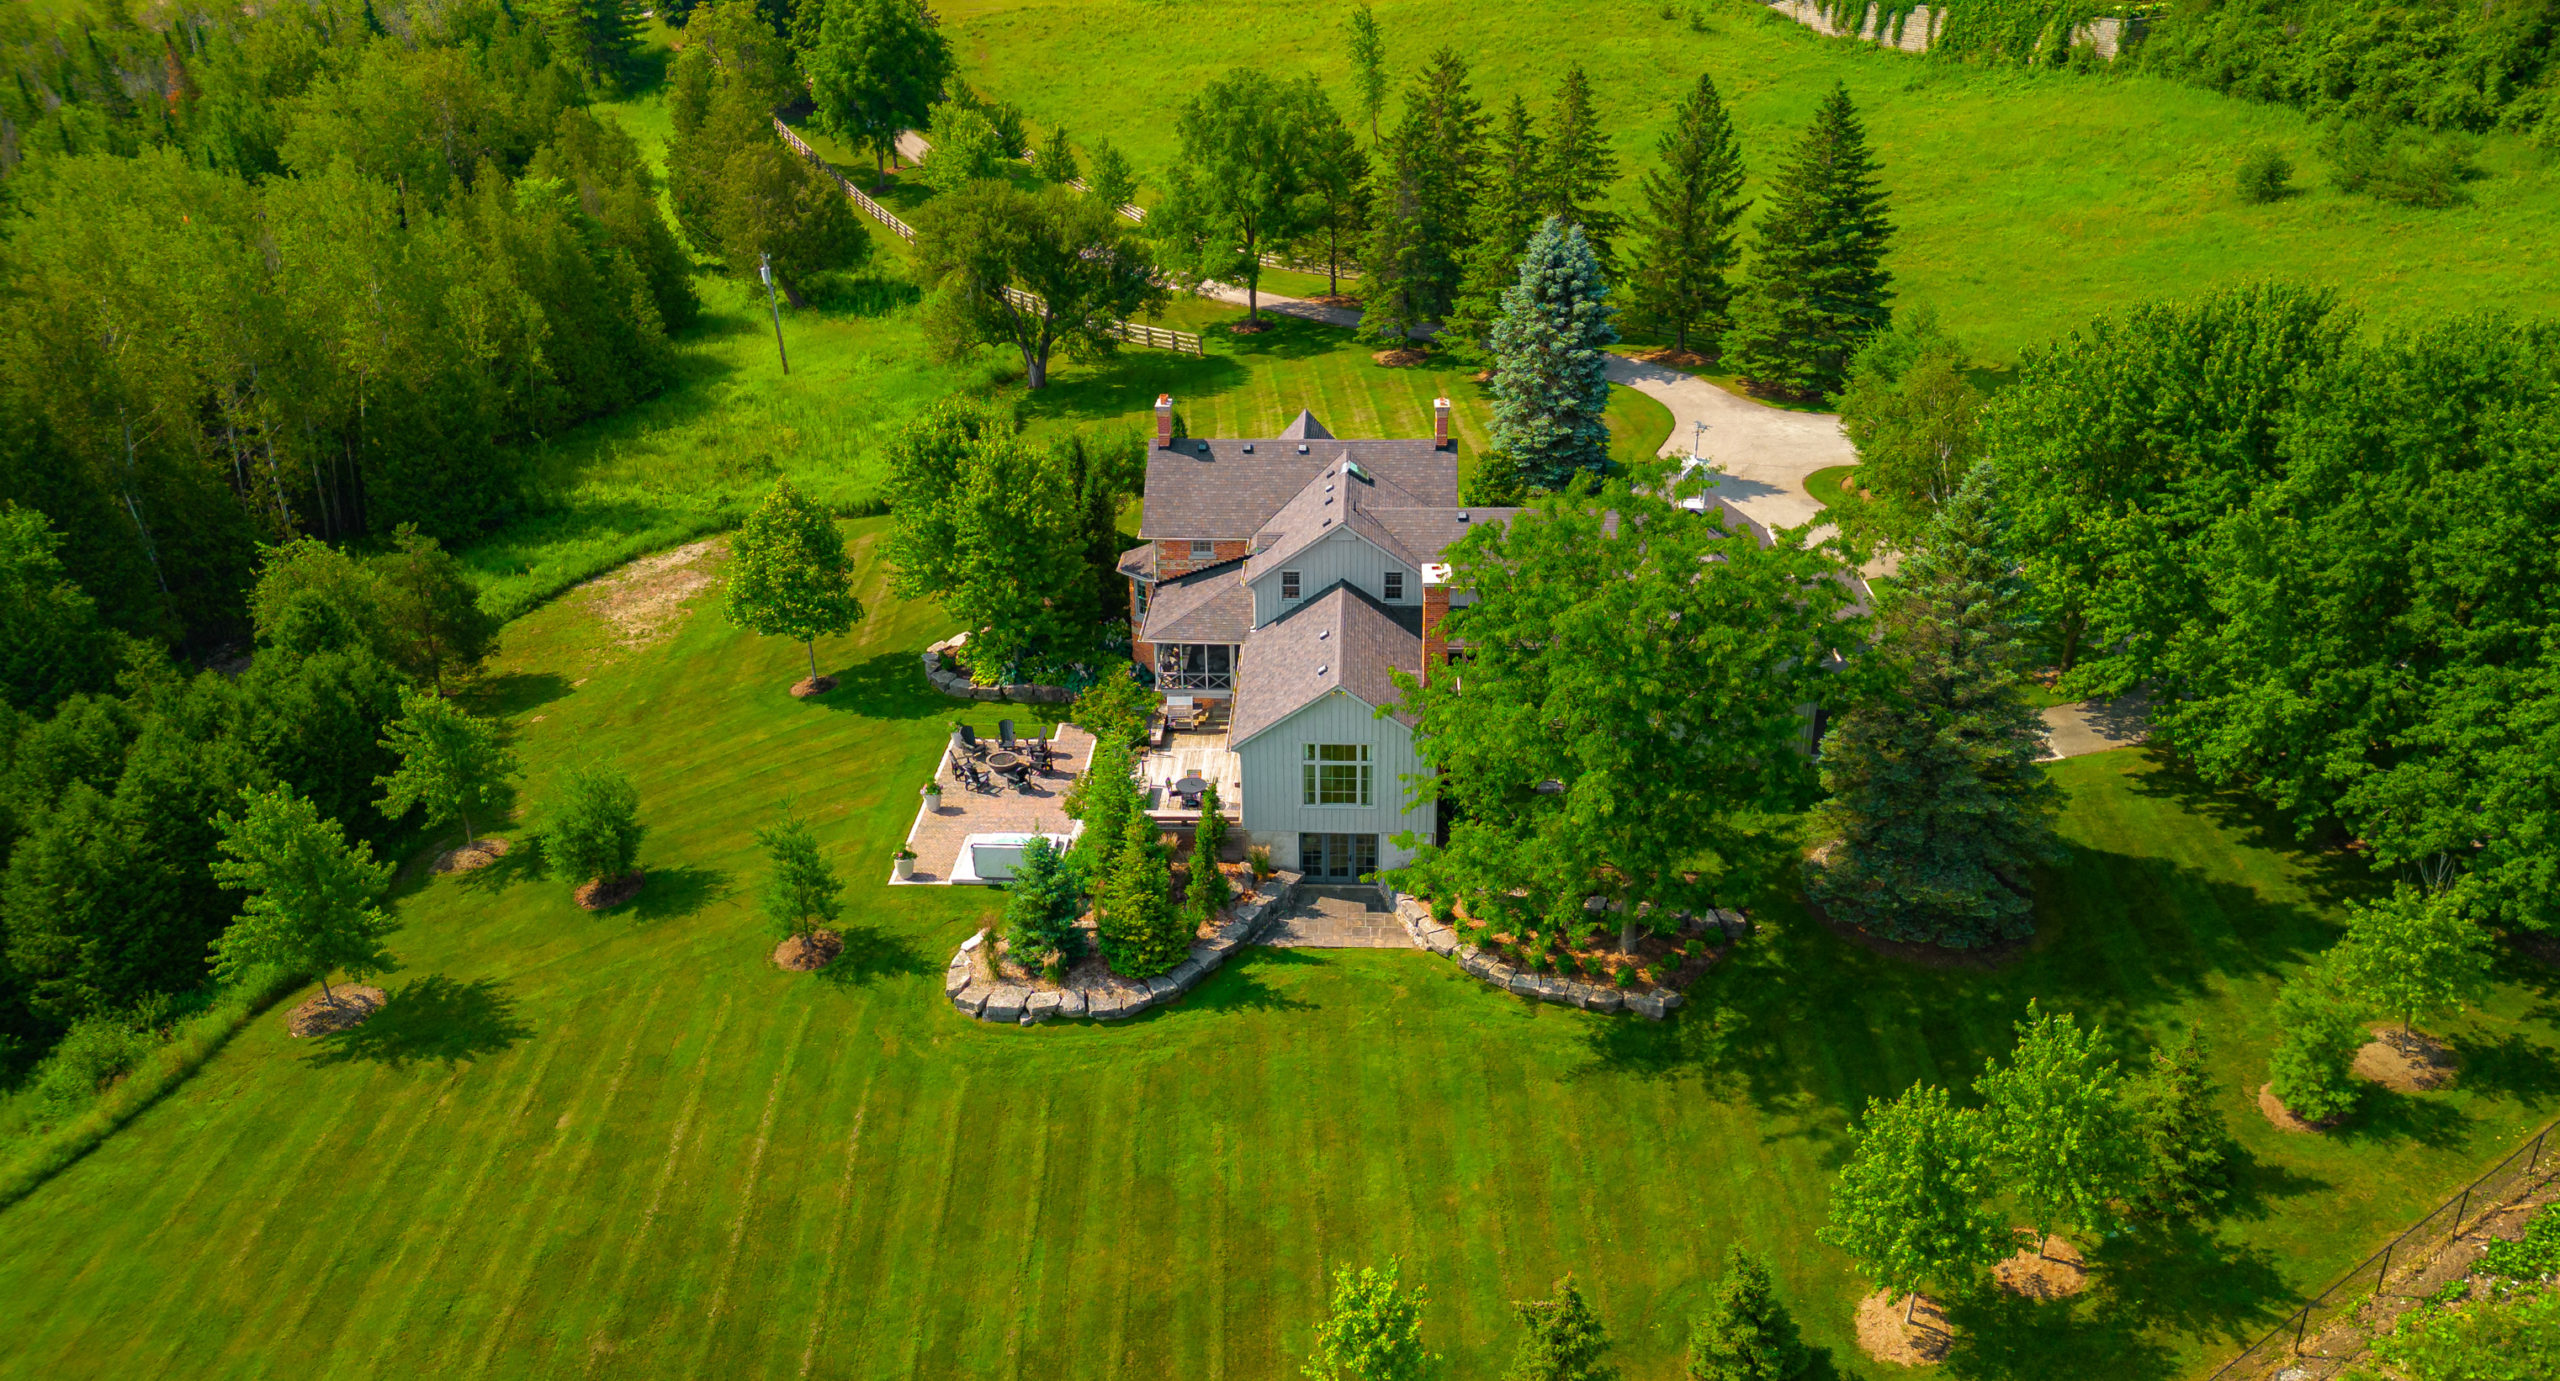 The property sits on 12 acres of verdant land. 